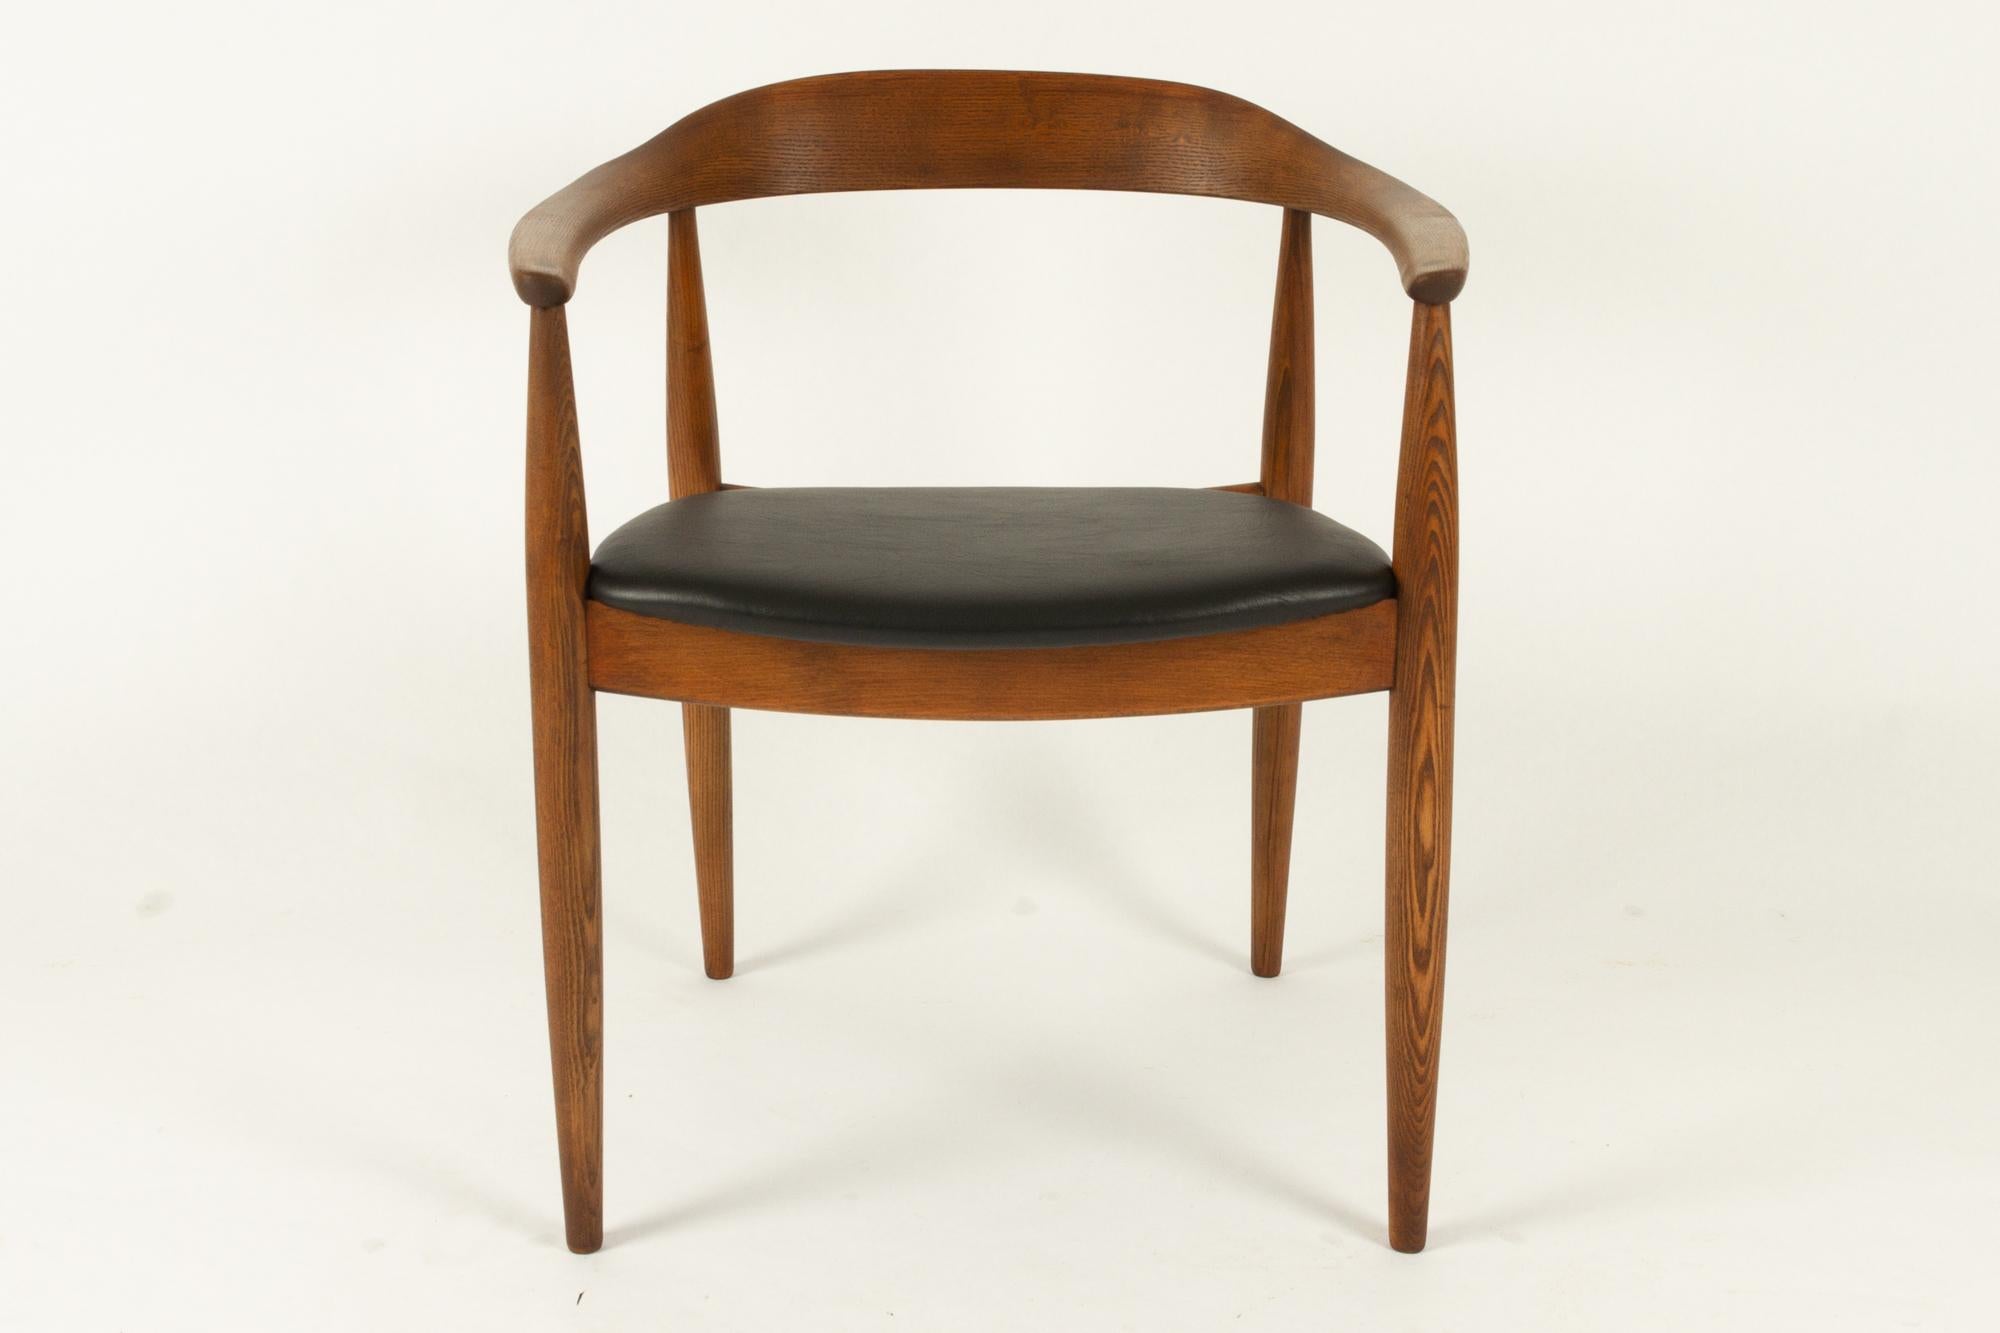 Vintage Danish armchair by Illum Wikkelsø, 1950s.
Beautiful and sculptural Danish chair in solid elm by Danish architect Illum Wikkelsø, made by Niels Eilersen. Wide curved backrest in solid elm. Round tapered legs. Seat is new upholstered in